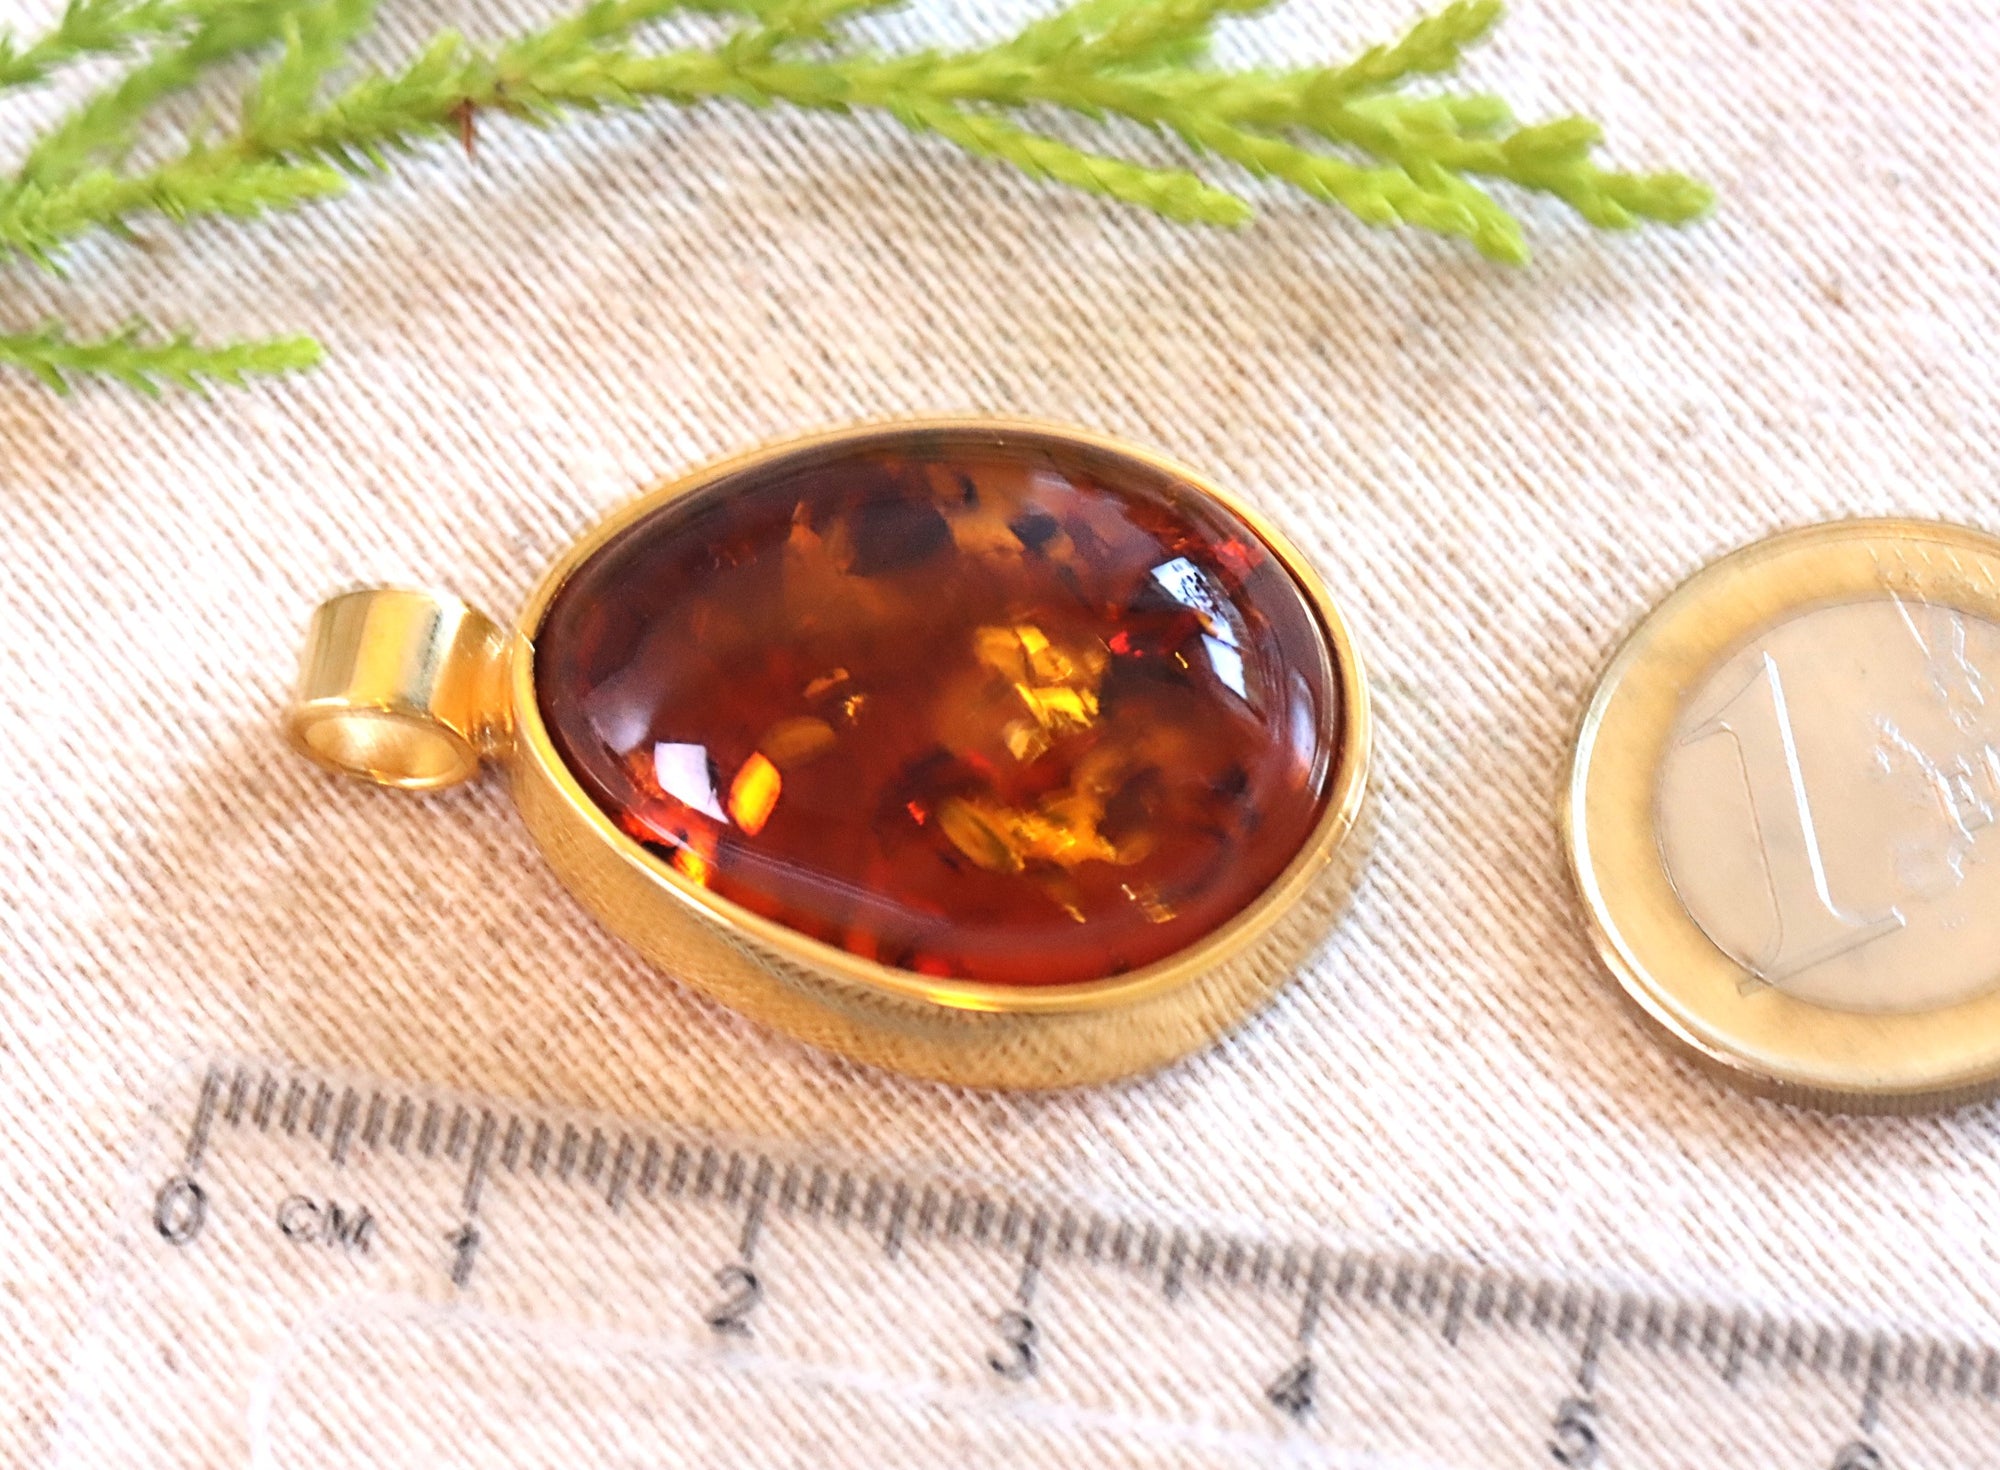 Special Offer Solid Amber Pendant on 925 Gold Plated Silver